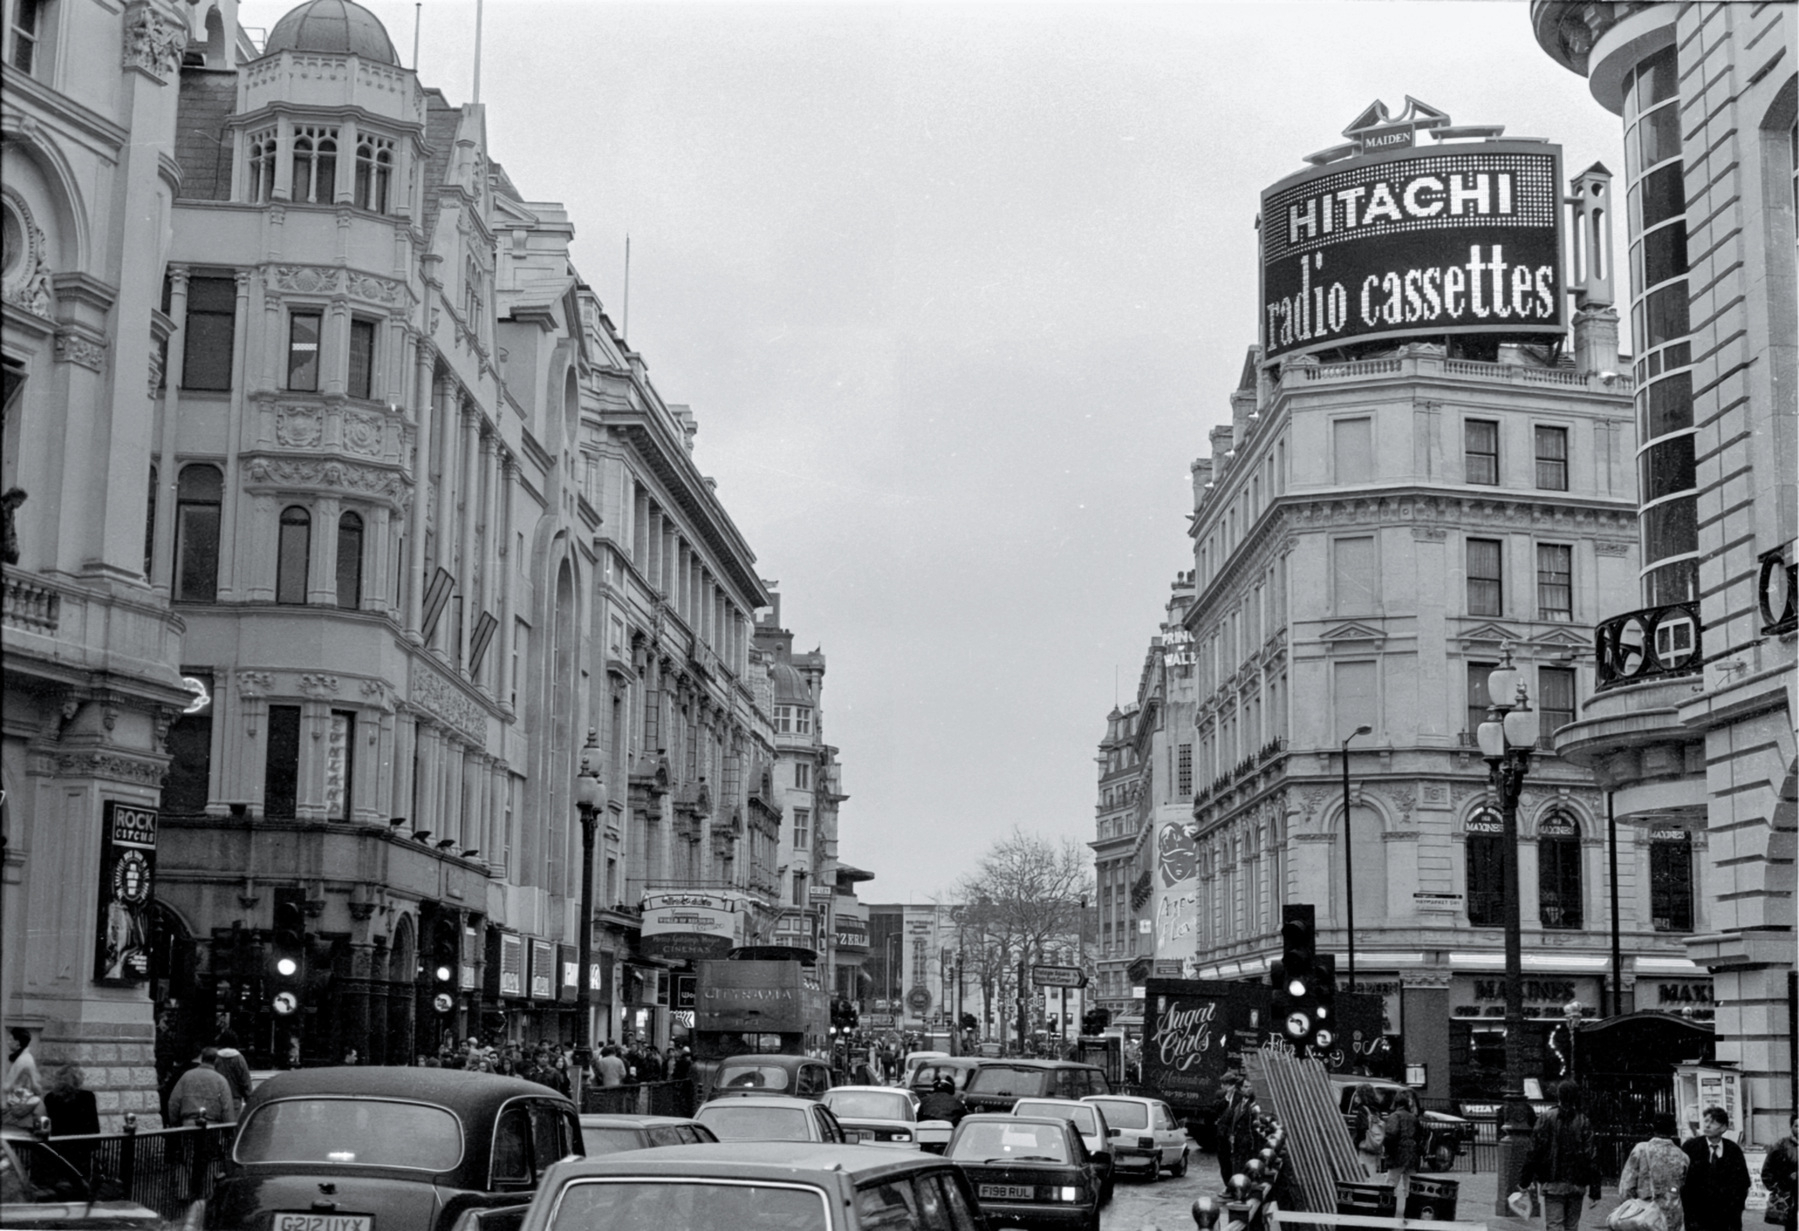 Picadilly Circus in 1991, looking toards Leicester Square